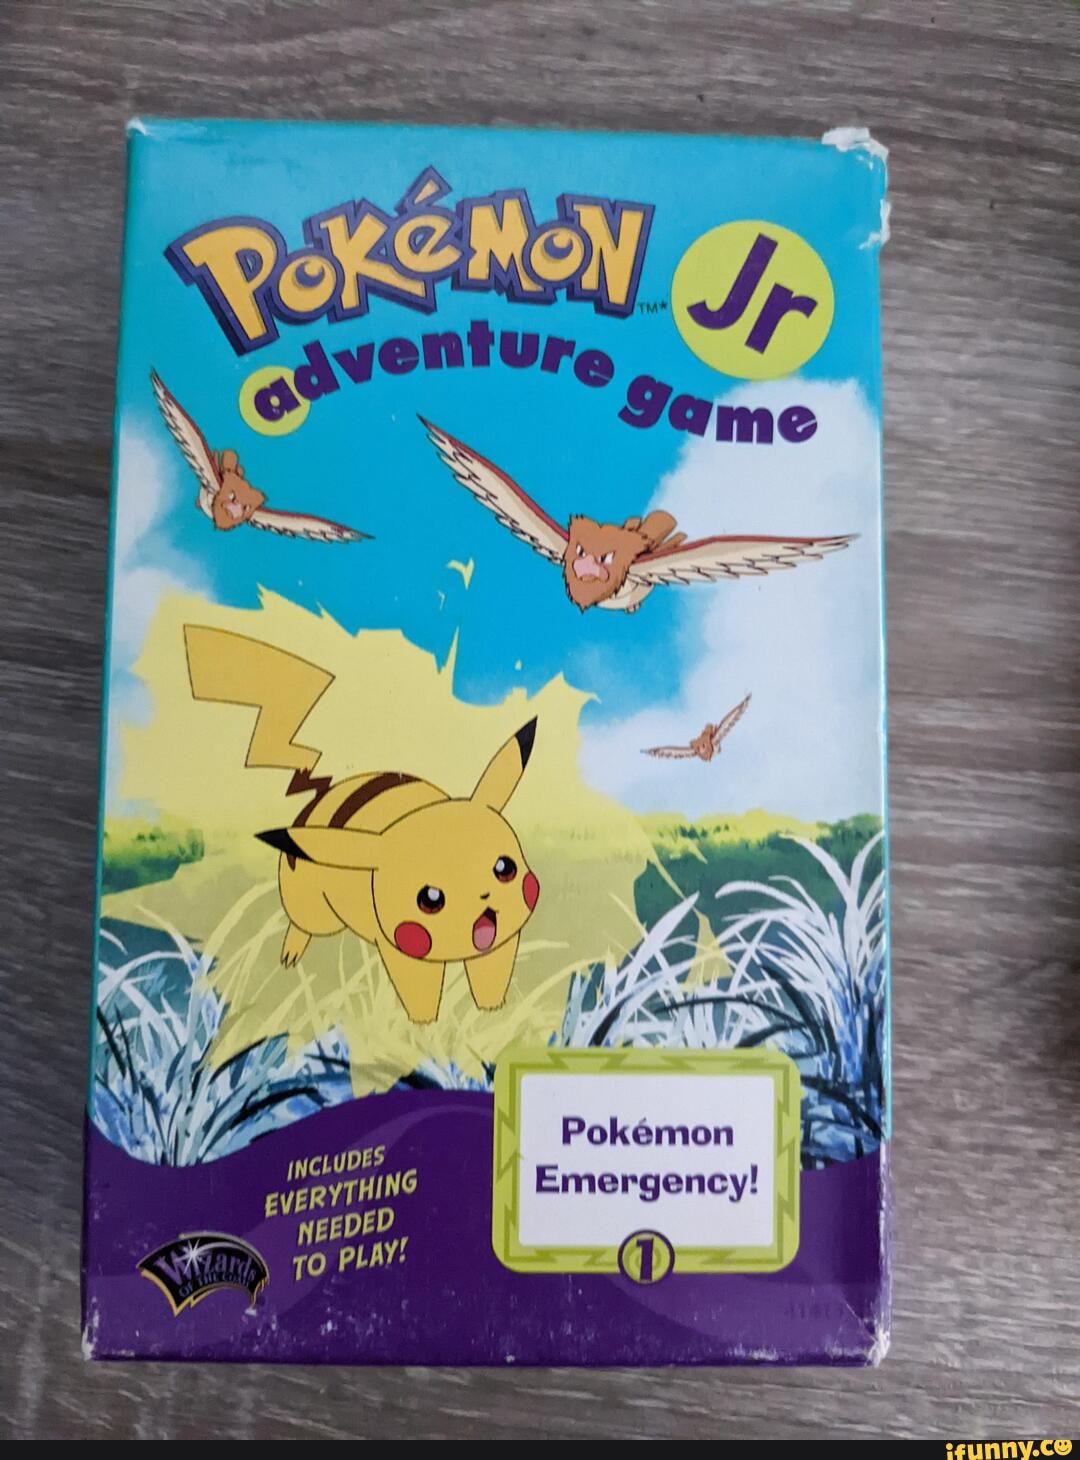 Hey you ever played the Pokemon tabletop game? No not the card game, the RPG.  You didn't know there was an official Pokemon RPG? Well let me introduce  you to the Pokemon